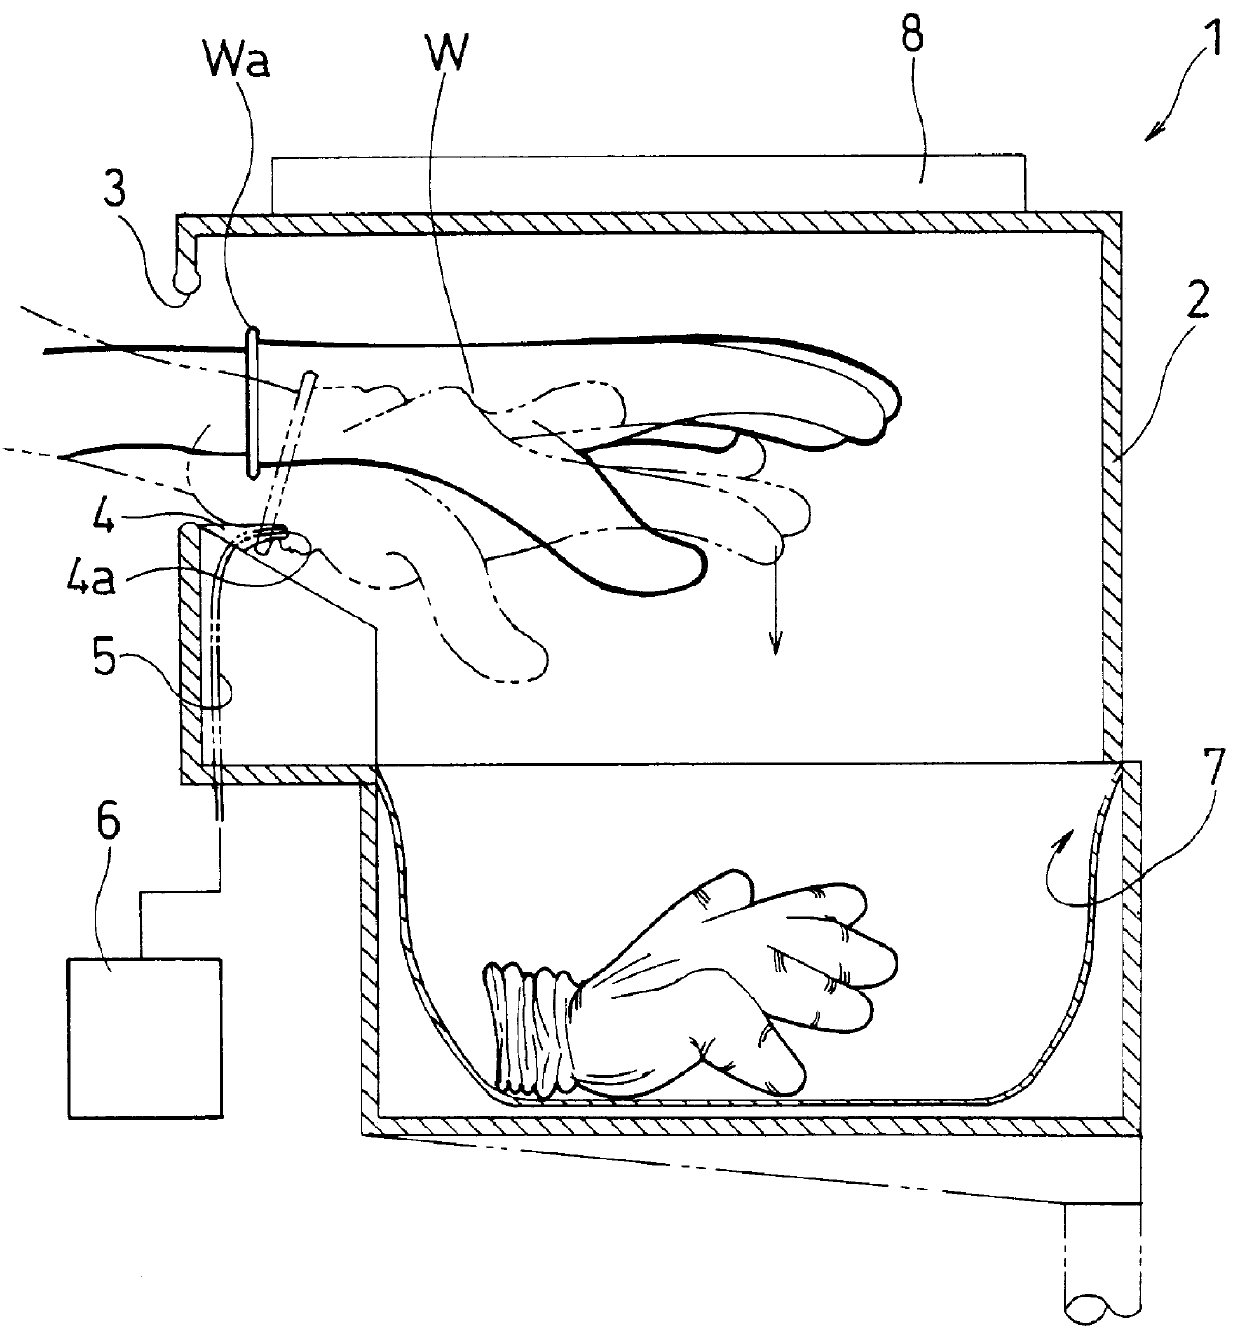 Glove release apparatus and method for the same